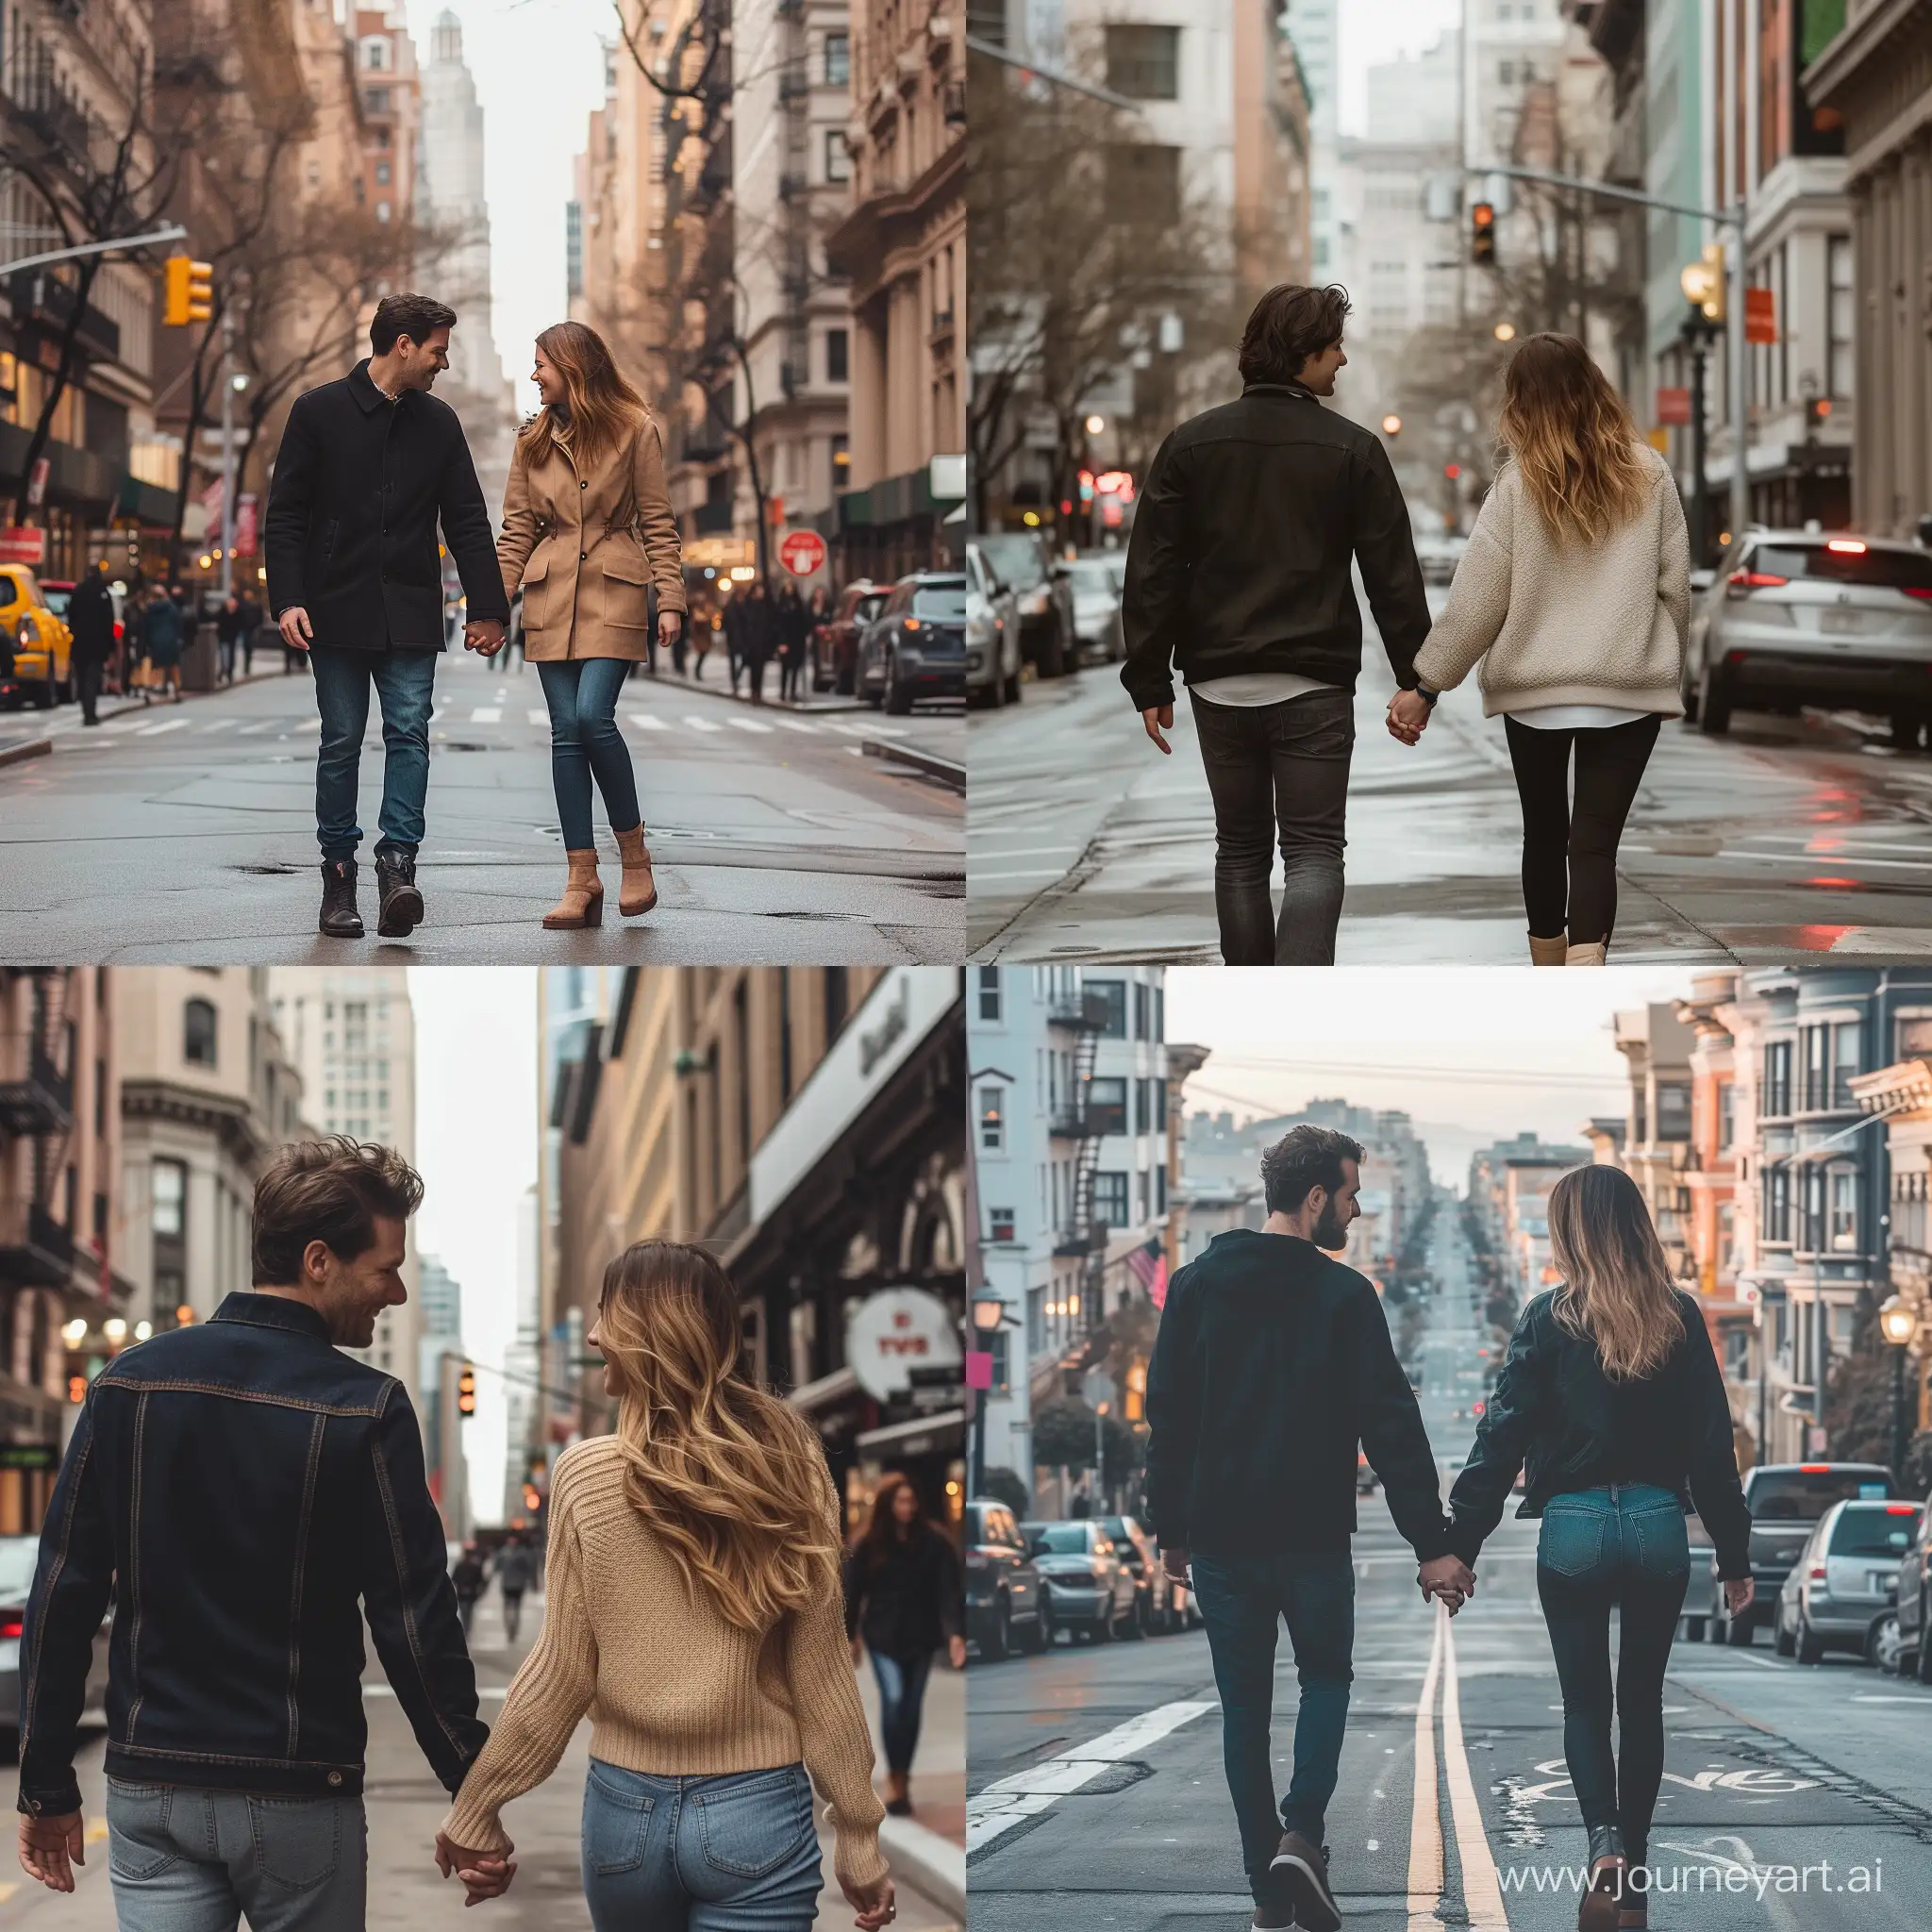 Man and woman holding hands walking down a city street in love with one another